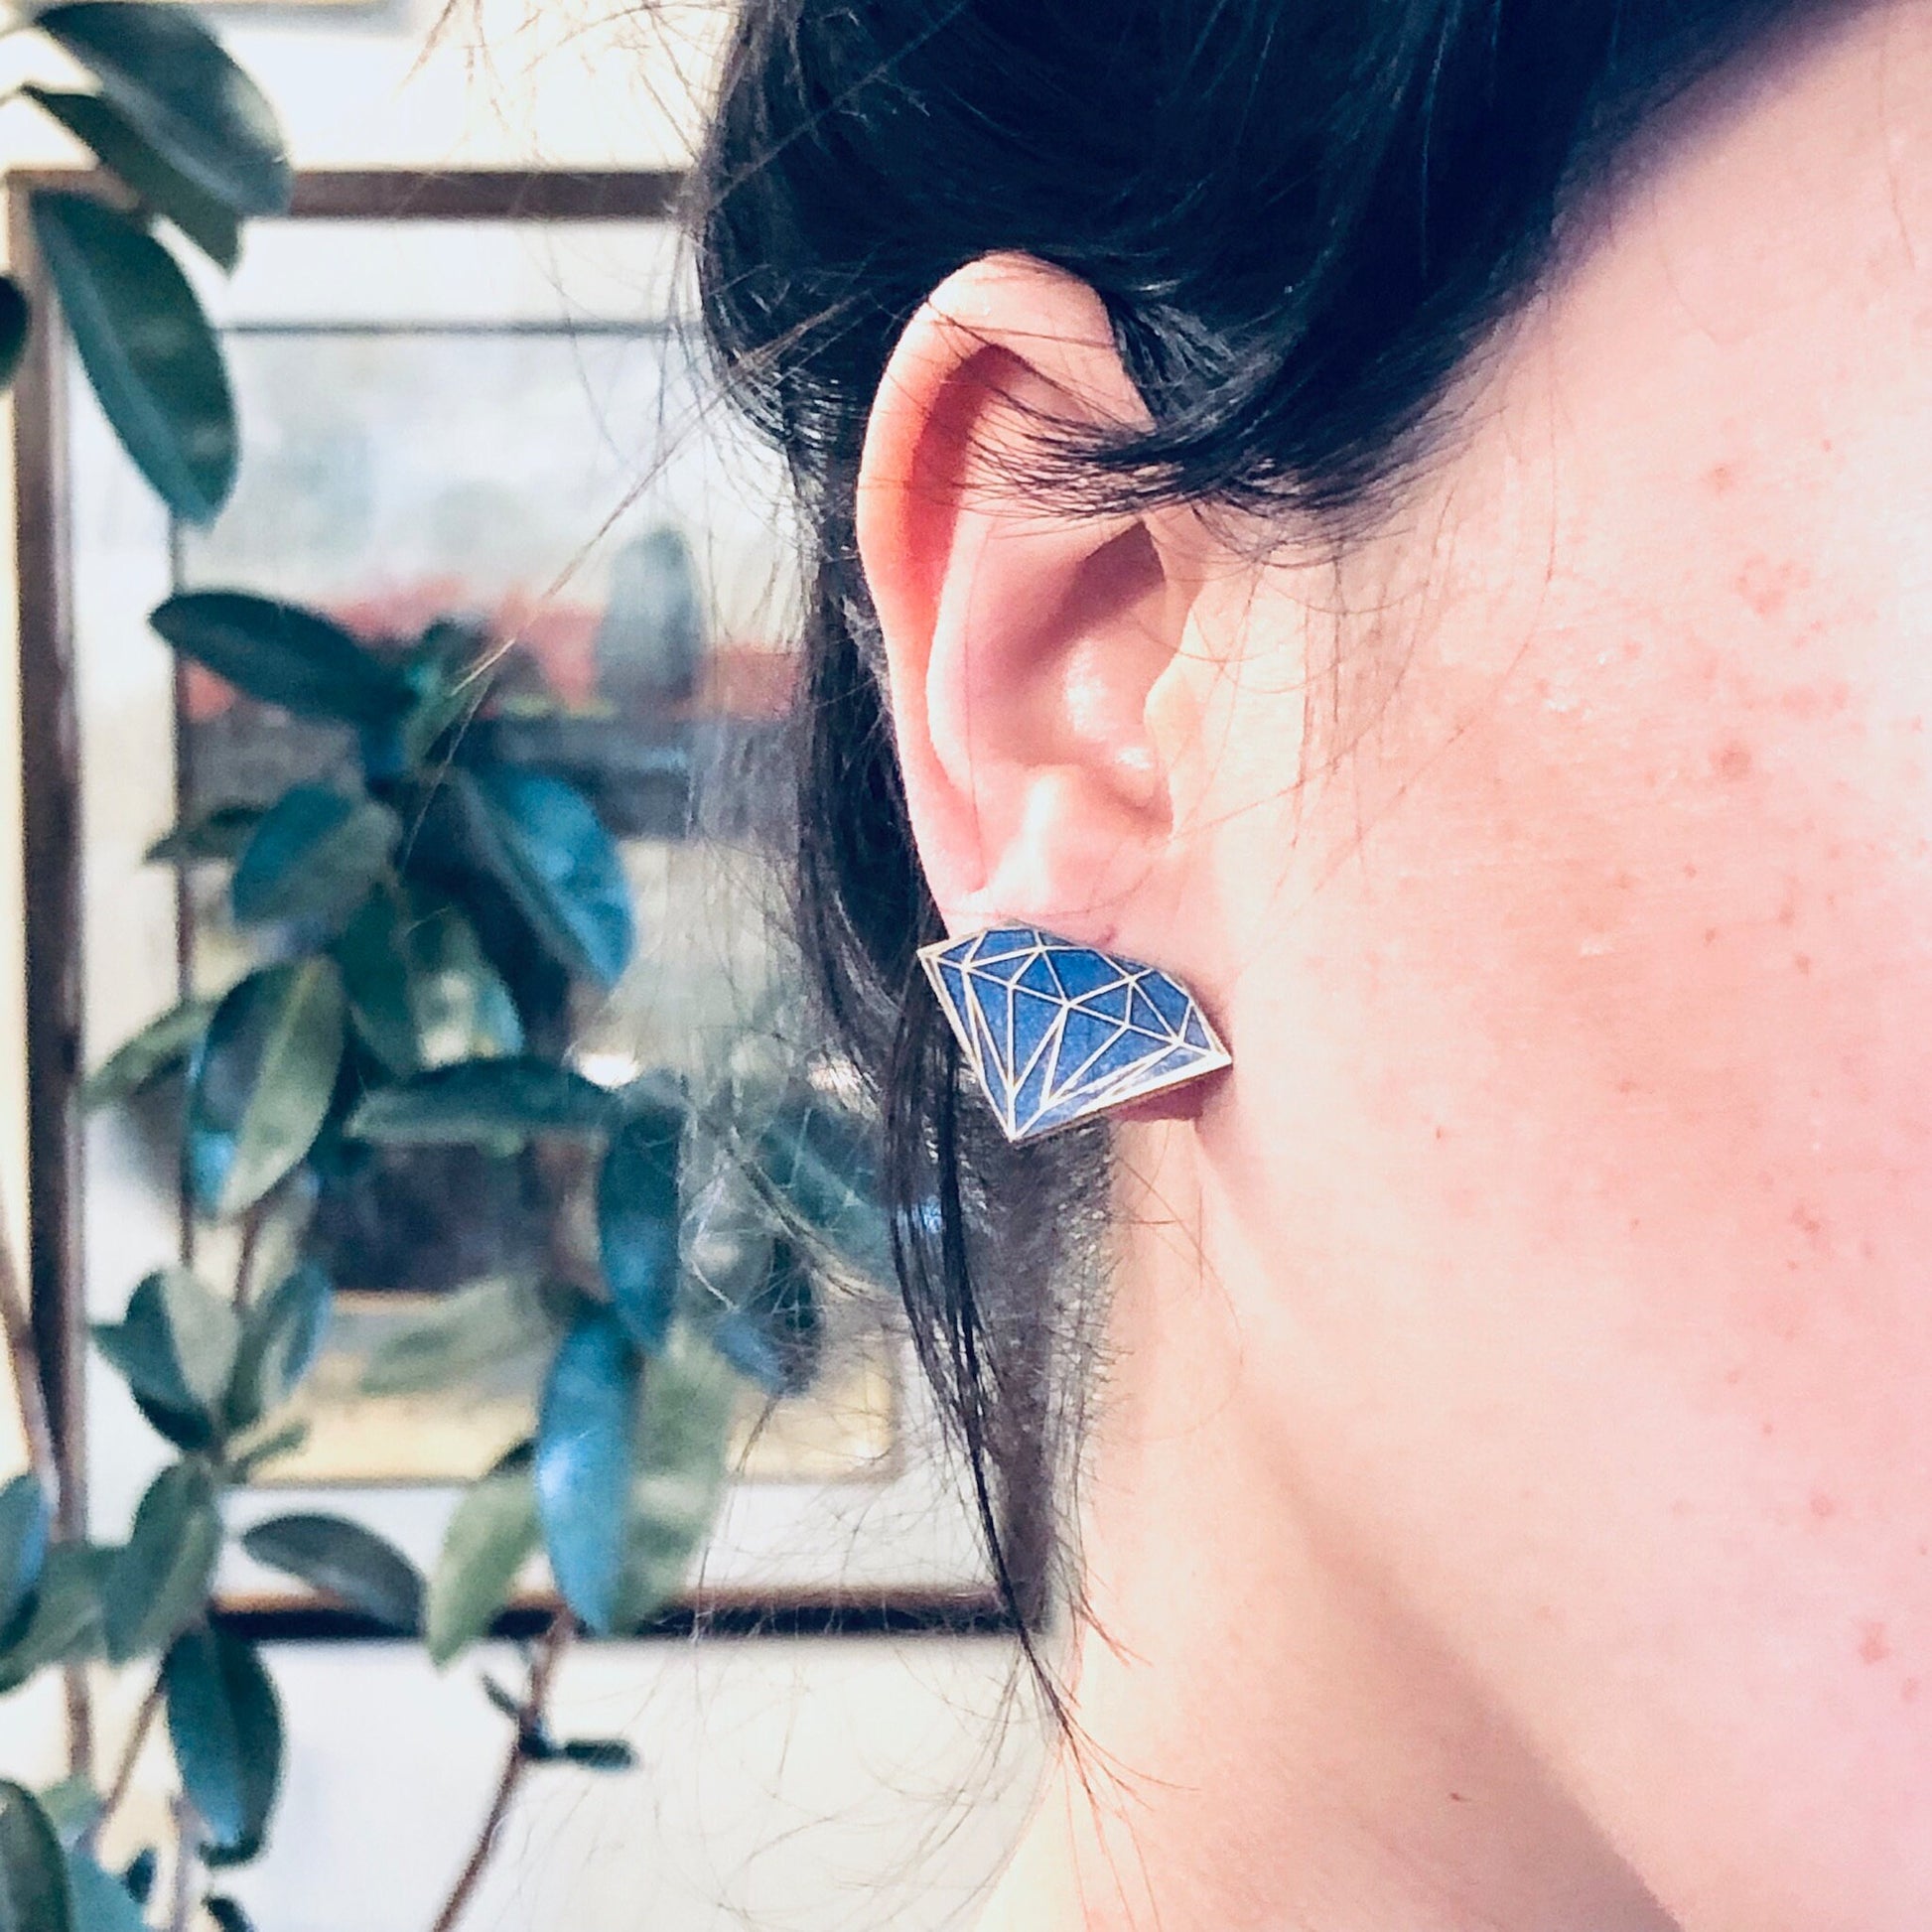 Close-up of a woman's ear pierced with blue diamond-shaped vintage earrings, with plants visible in the background.